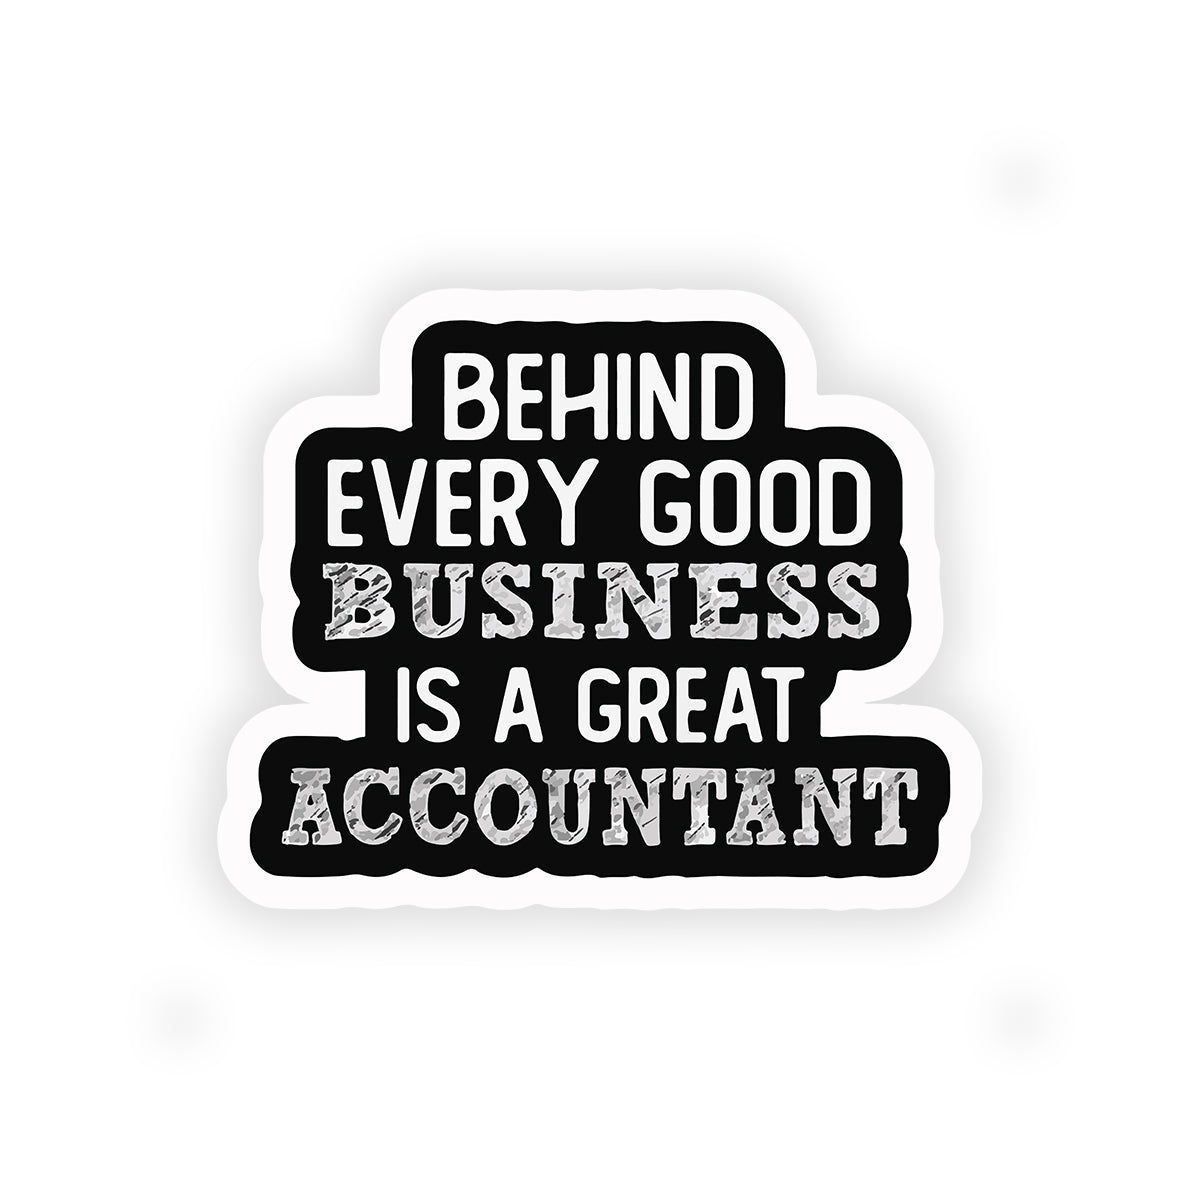 Behind every good business is a good accountant